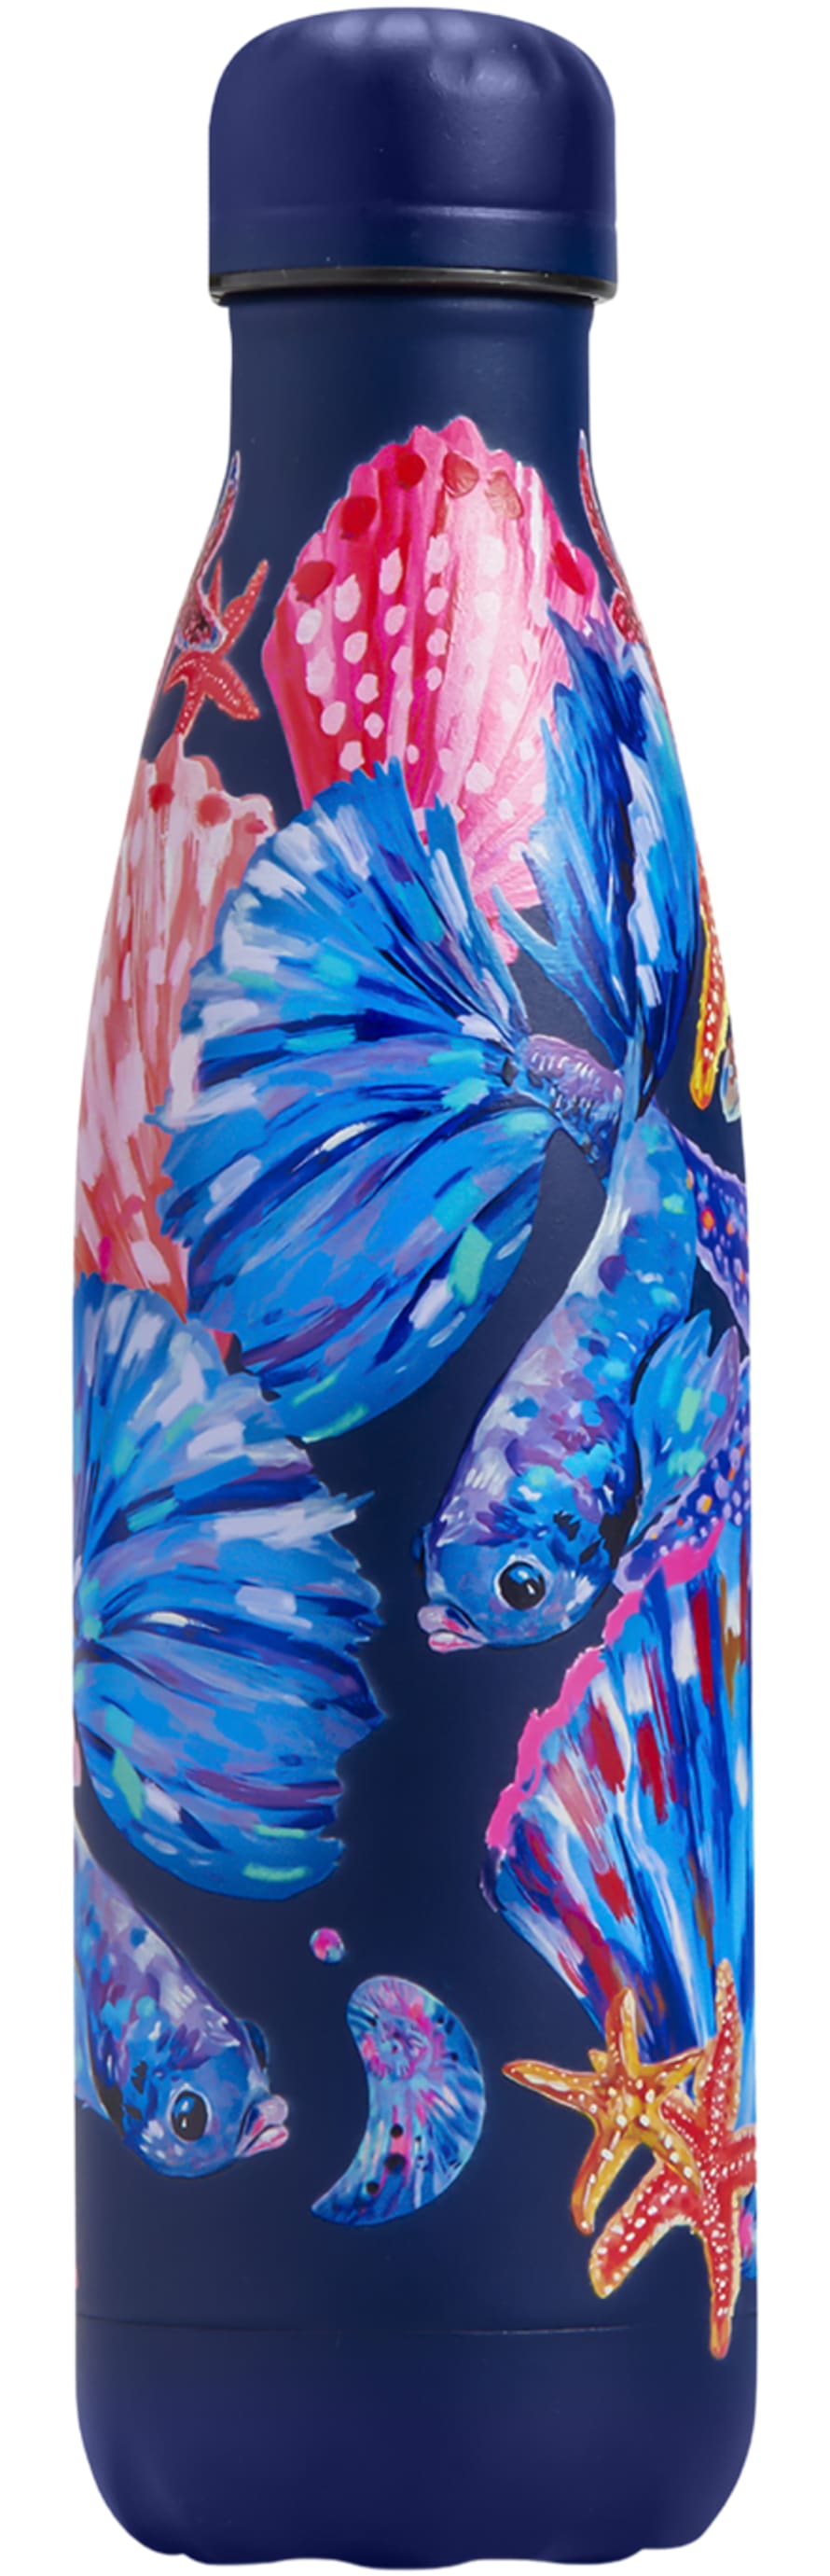 Chilly's 500ml Tropical Reef Printed Stainless Steel Bottle 